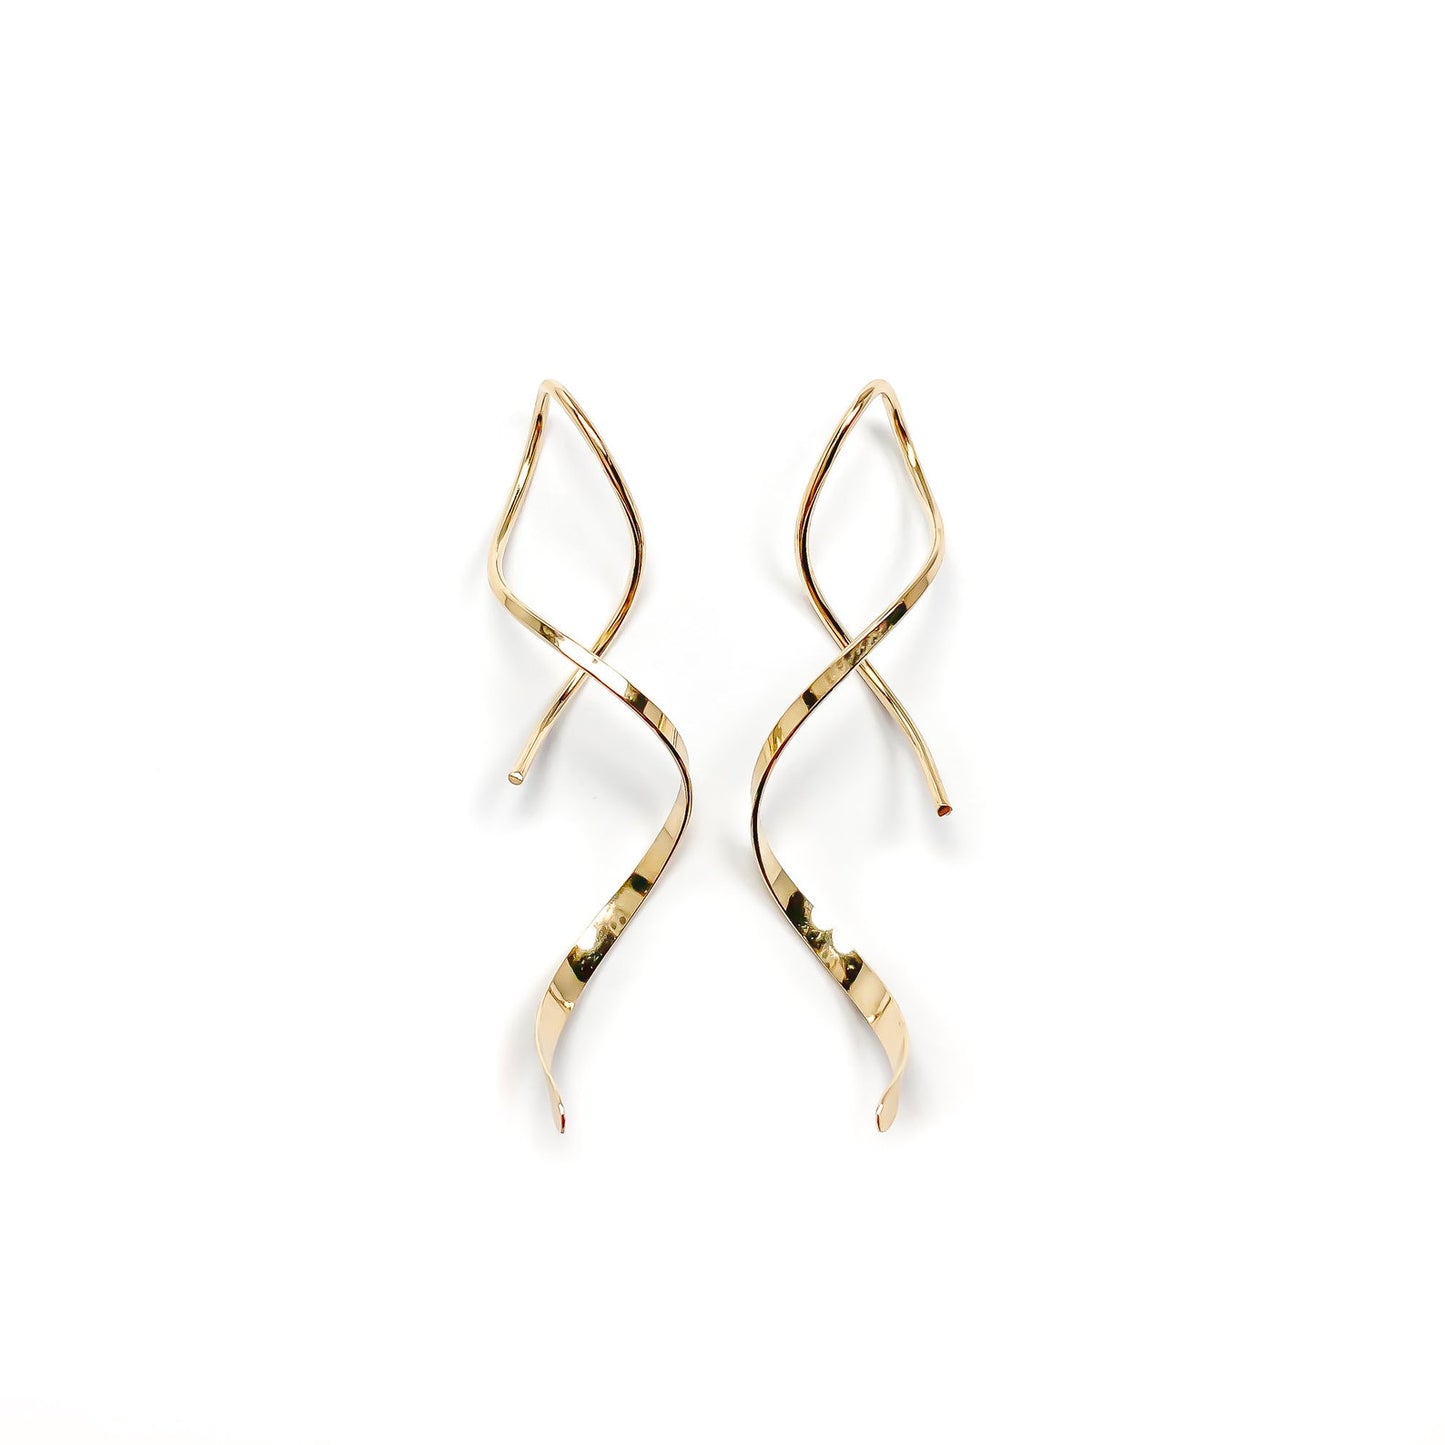 Solid 14K Gold Spiral Earrings